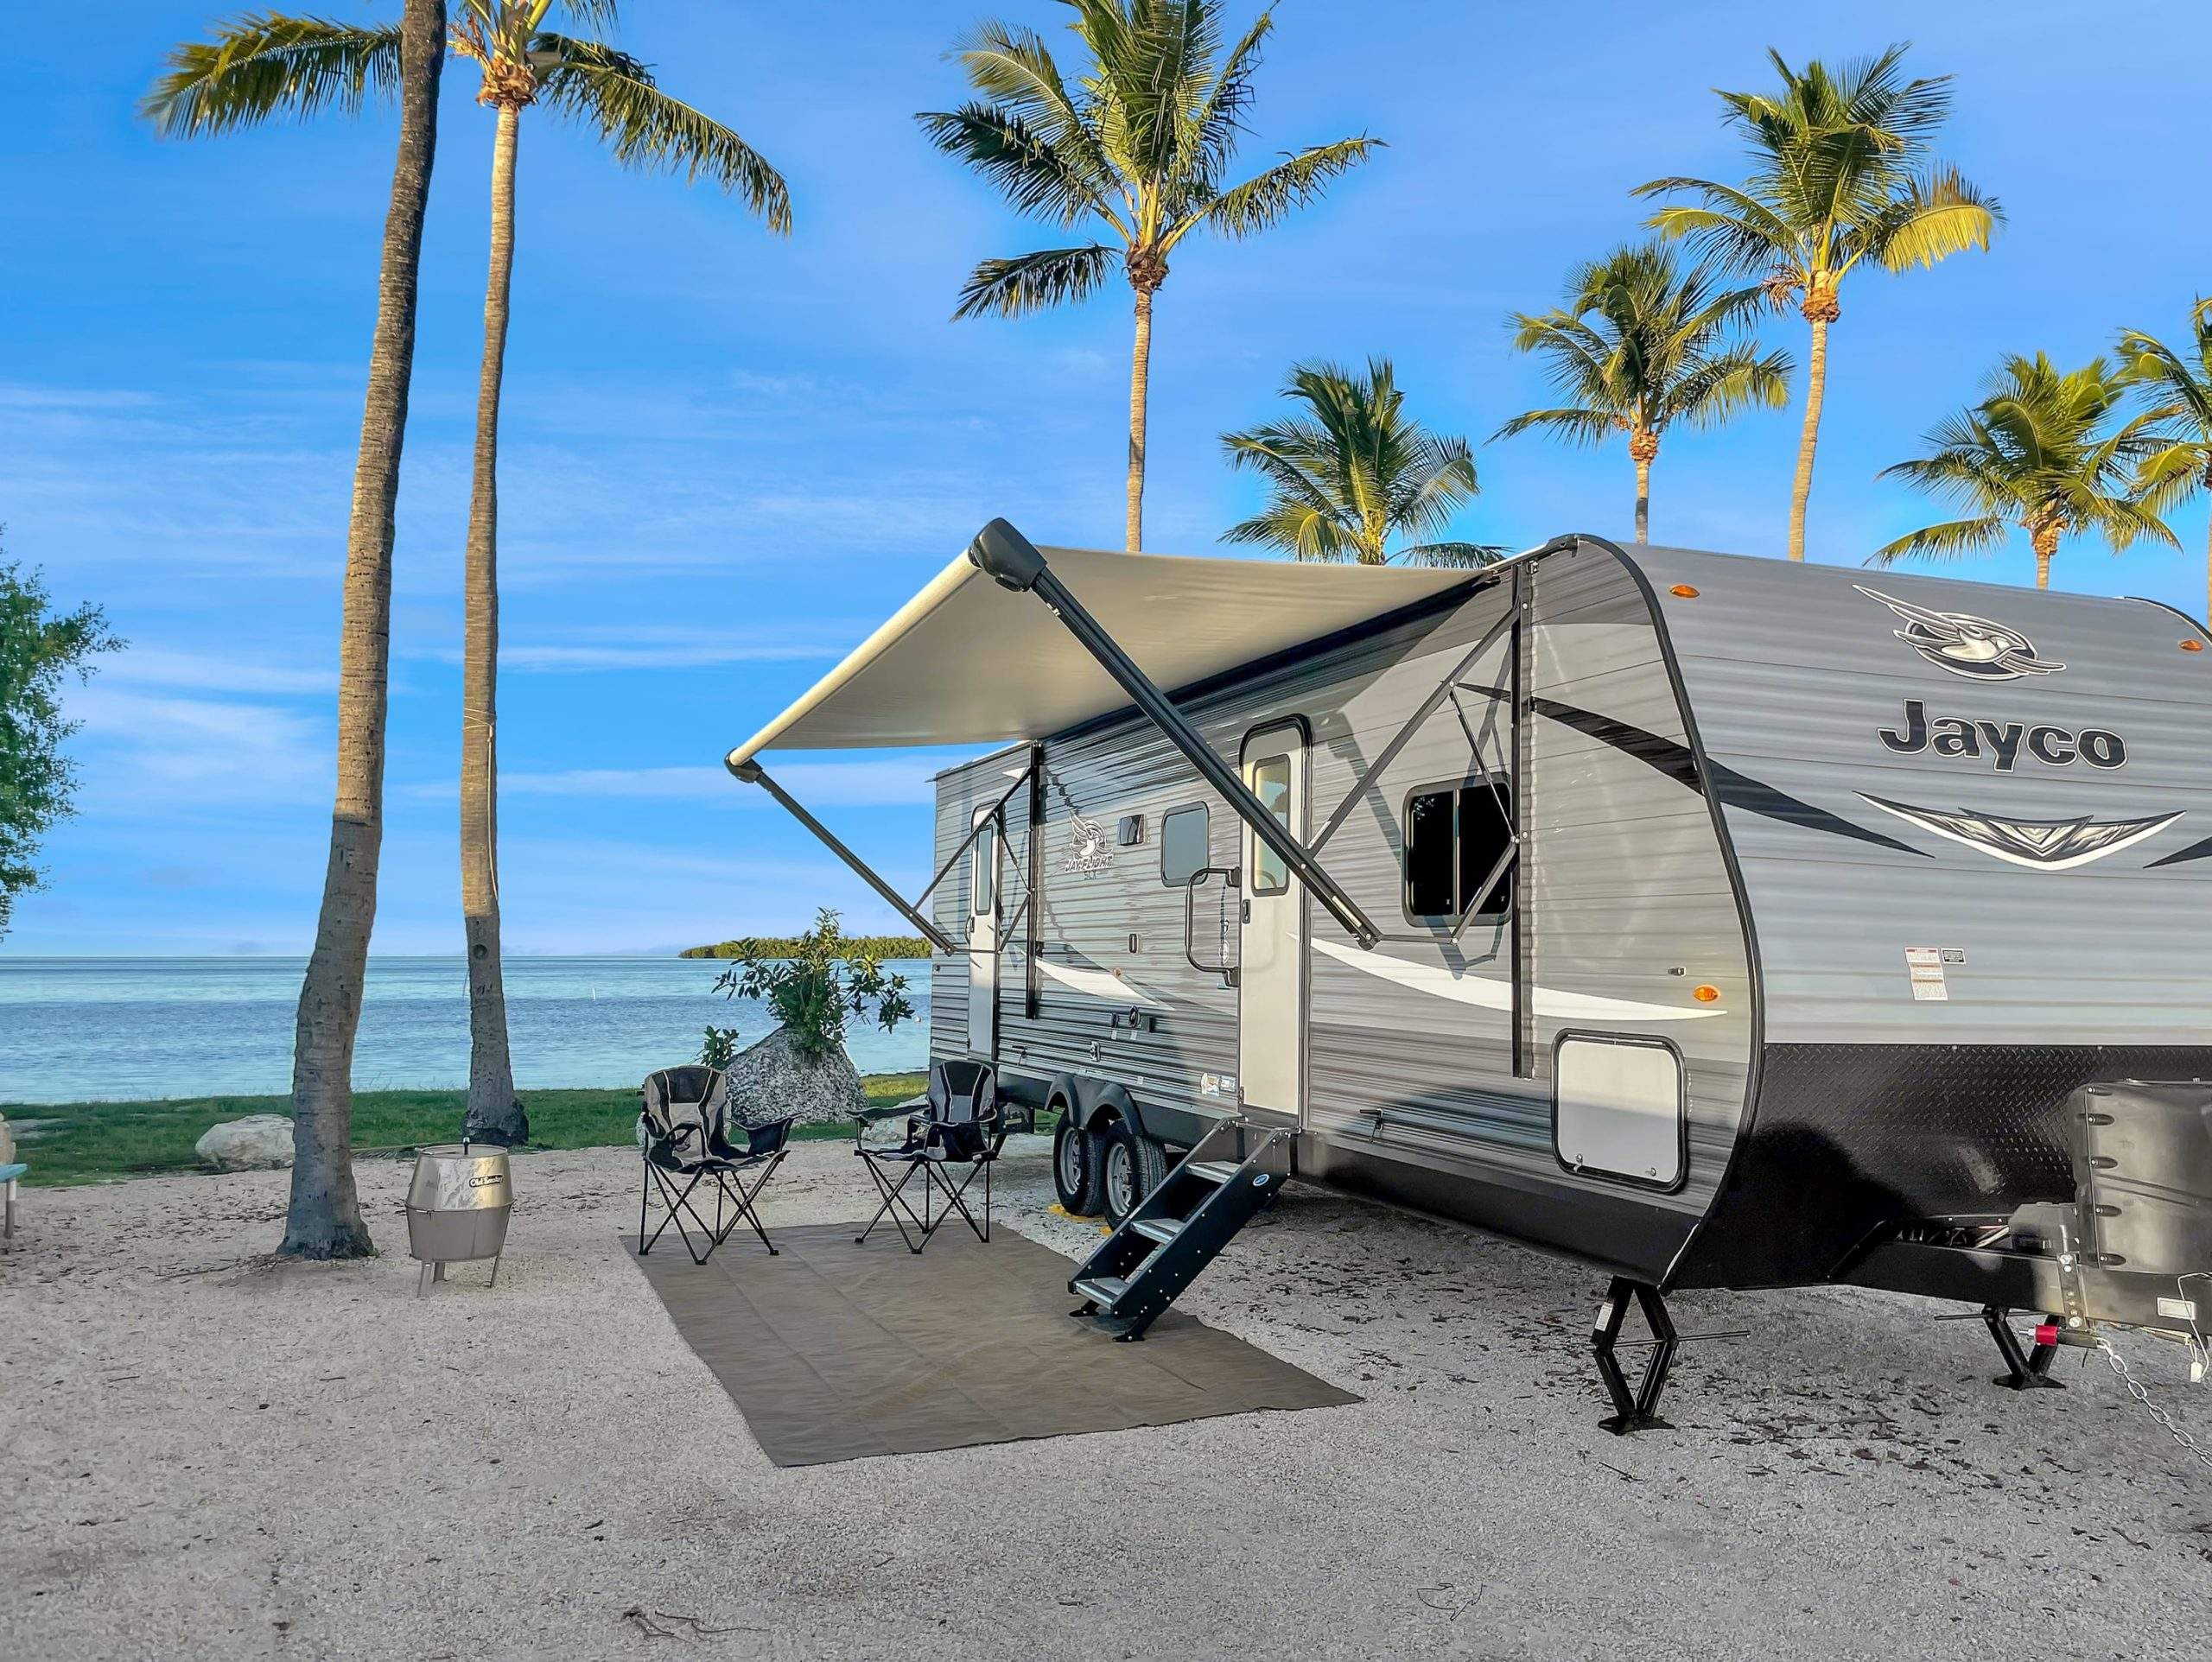 Top 10 Bang-for-Your-Buck RVs